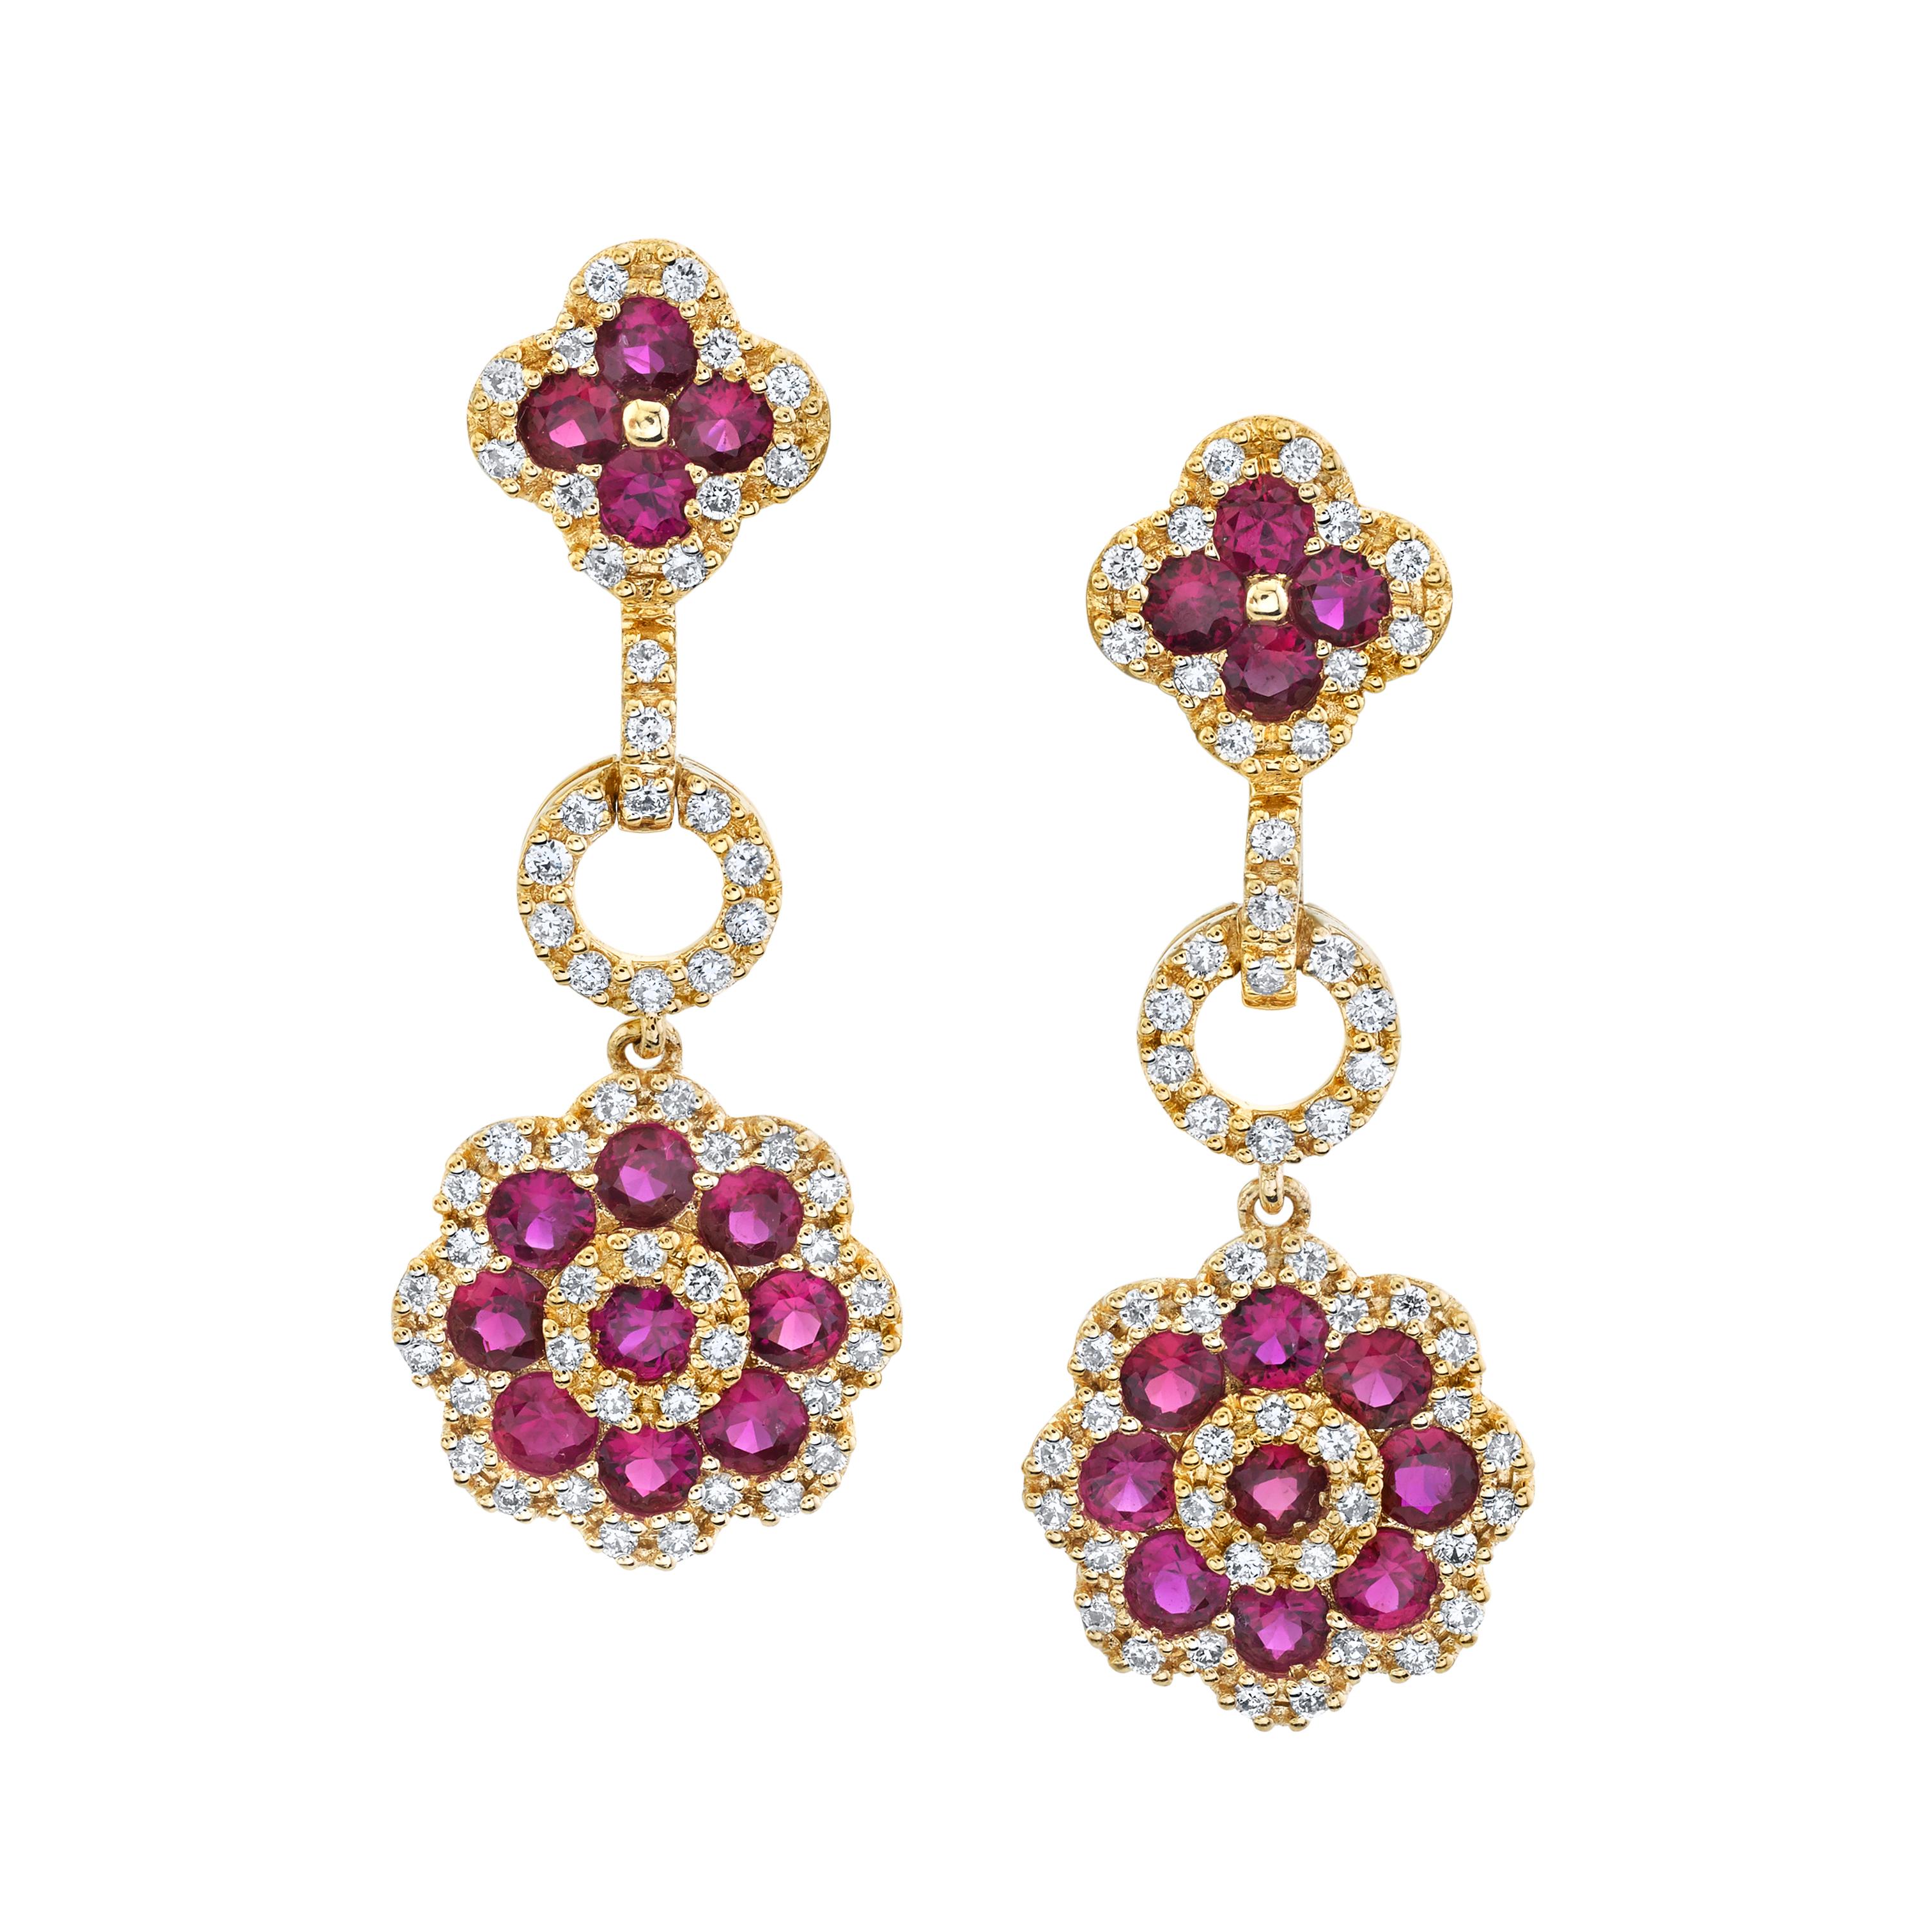 These sparkling drop earrings feature round rubies and diamonds arranged in an elegant yet playful floral pattern and set in 18k yellow gold. The ruby clusters are framed with beautiful diamond borders for eye-catching sparkle and contrast. They are